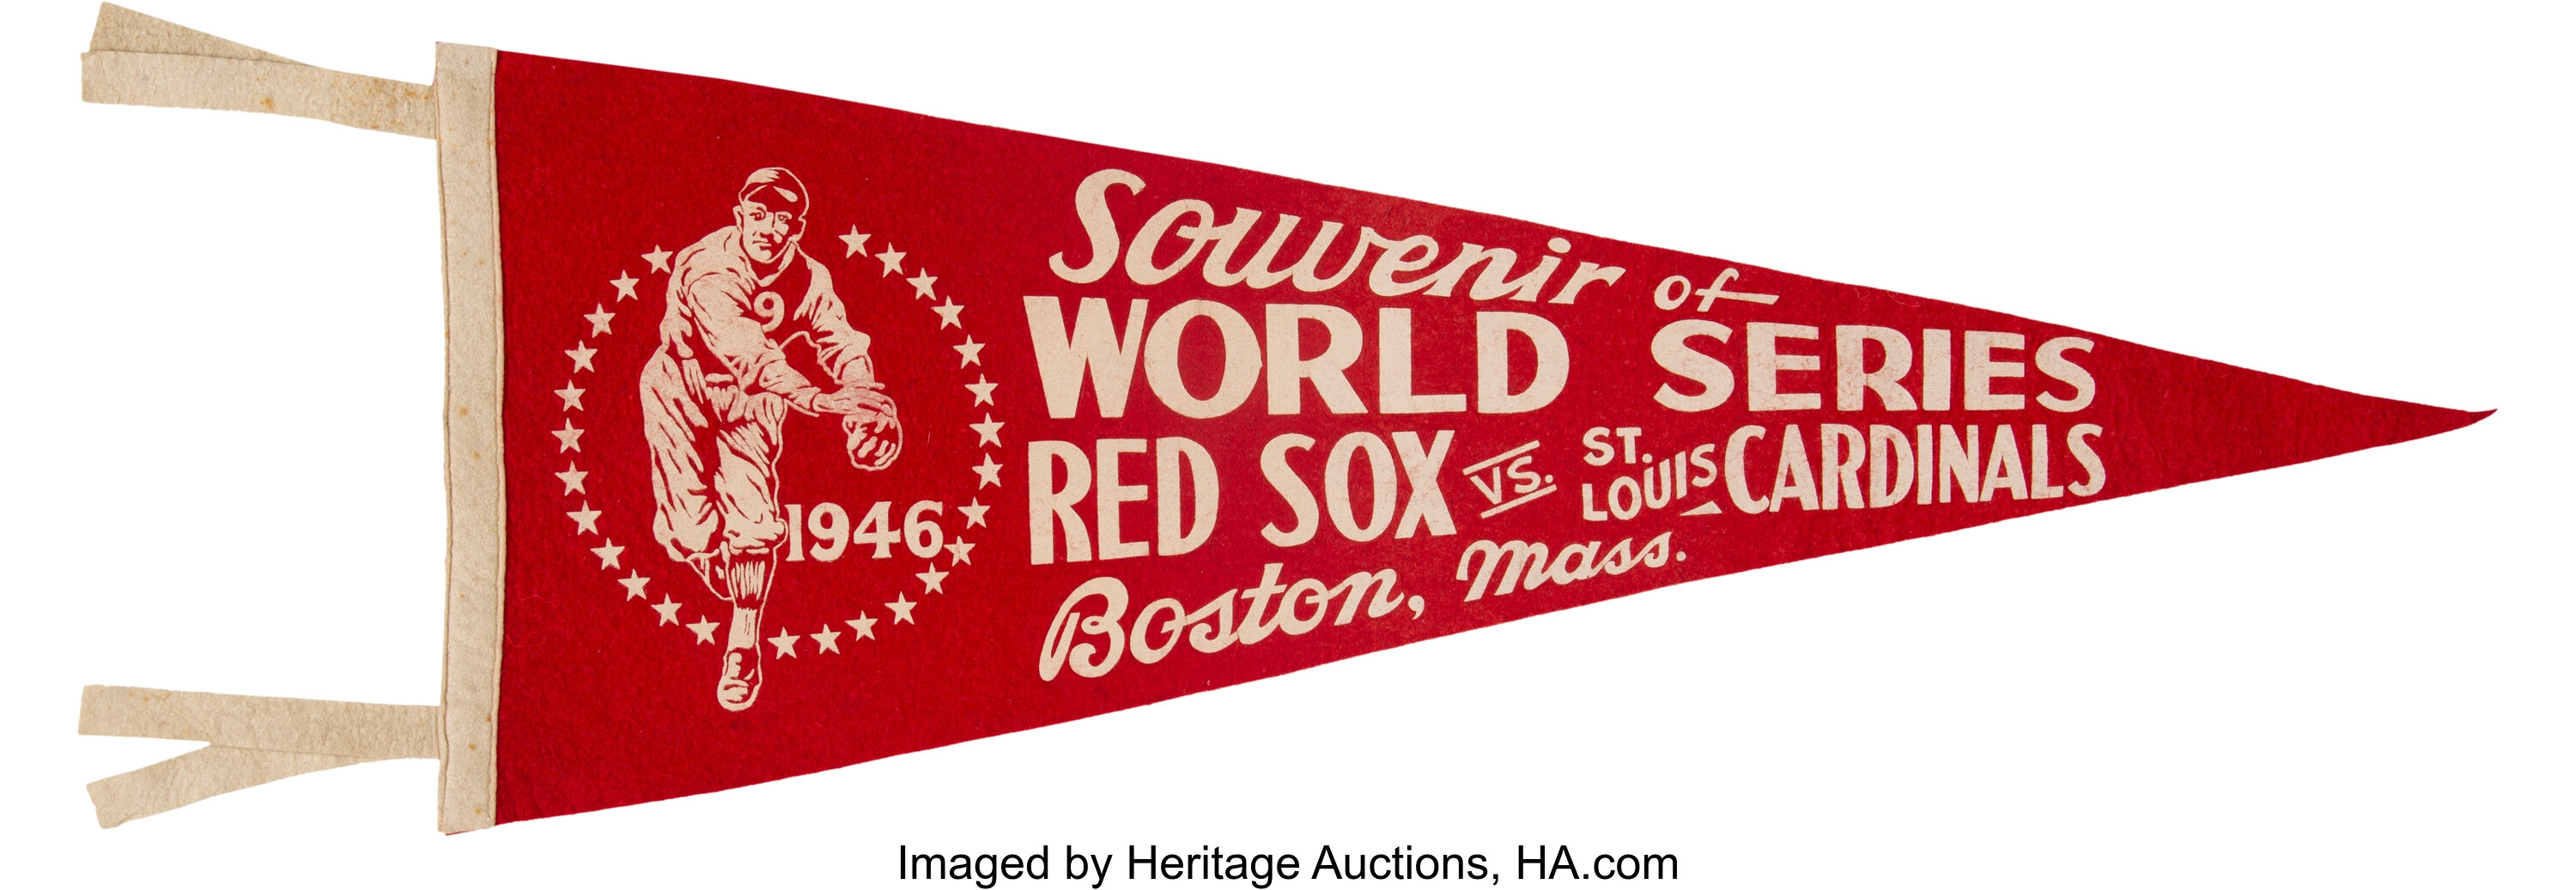 Boston Red Sox World Series Banners Duvet Cover